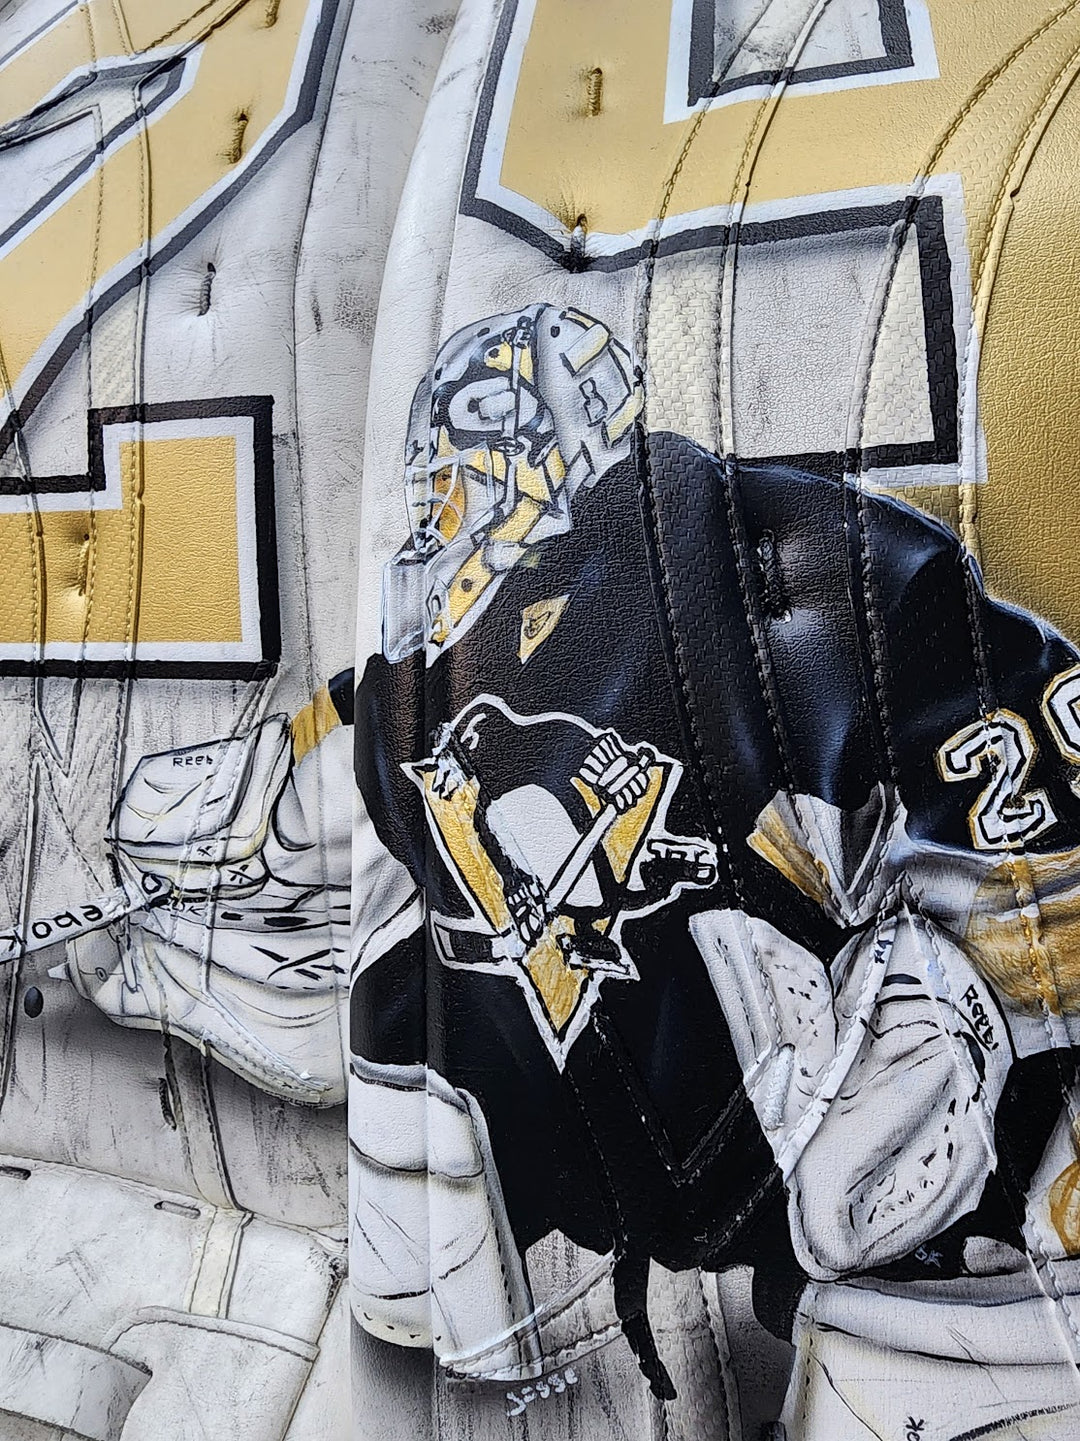 Unboxing Video: Marc-Andre Fleury Game Used Goalie Pads